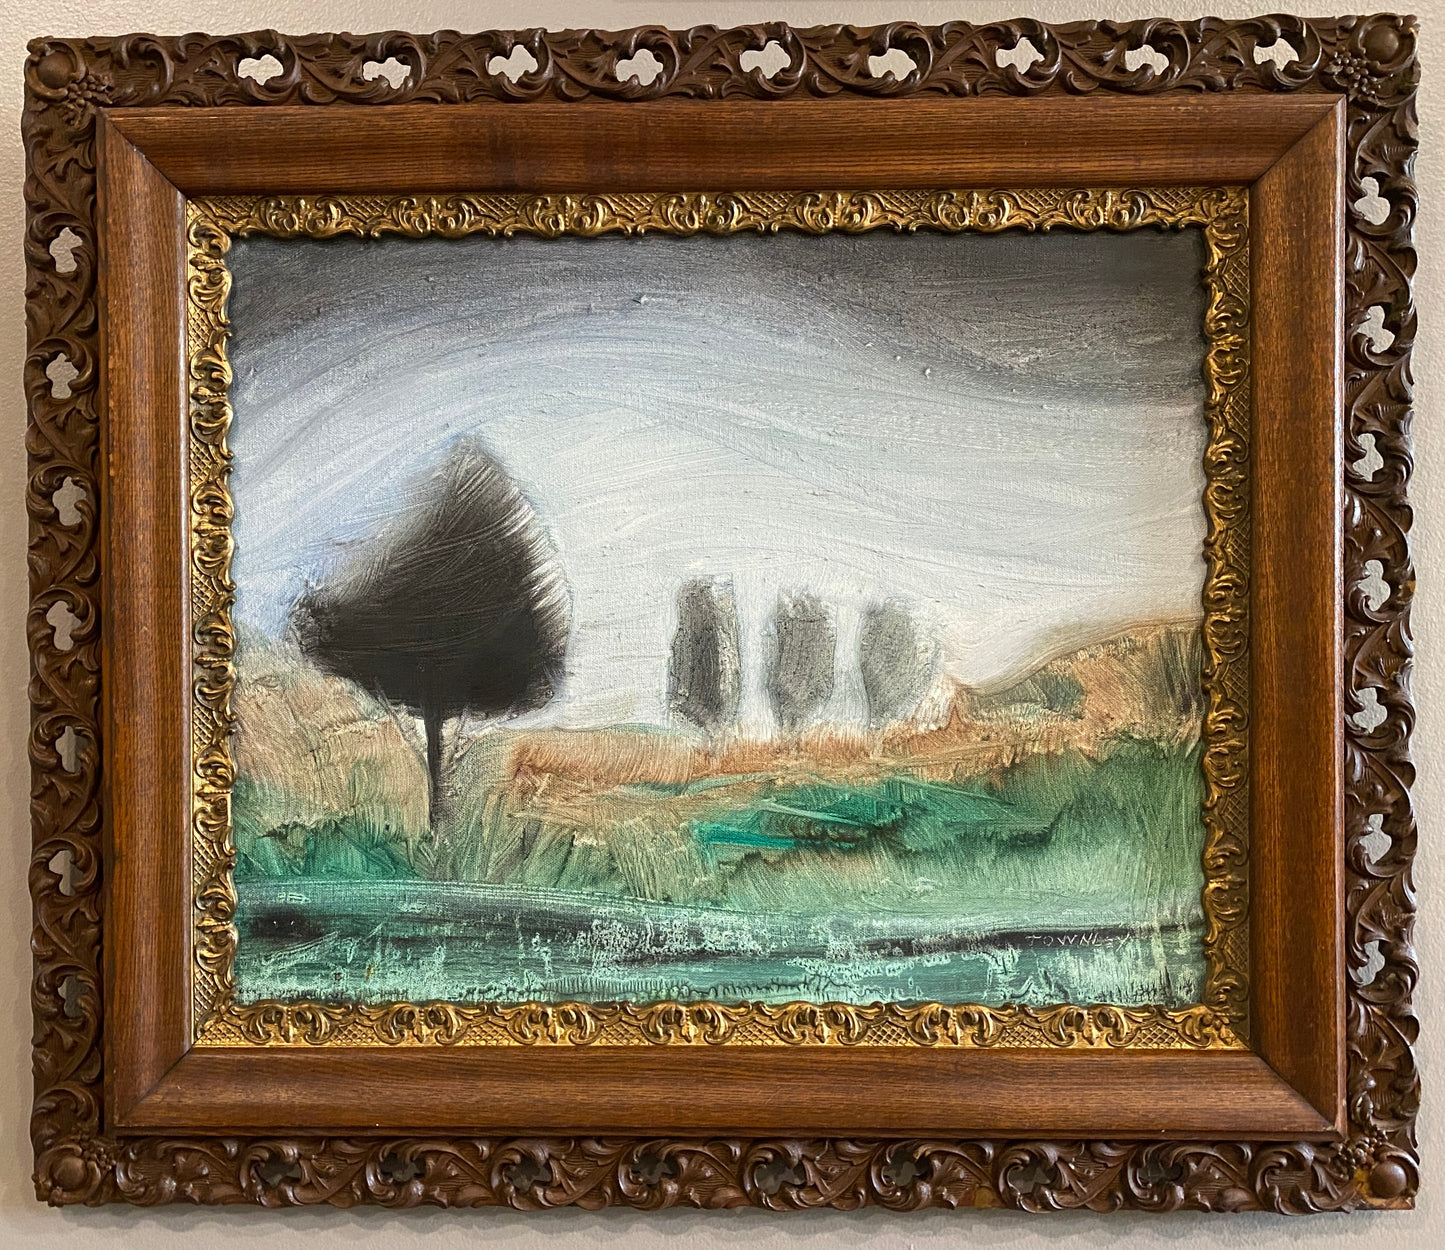 AUCTION BID NOW! Original oil Landscape painting ornate hand carved frame, signed by the artist